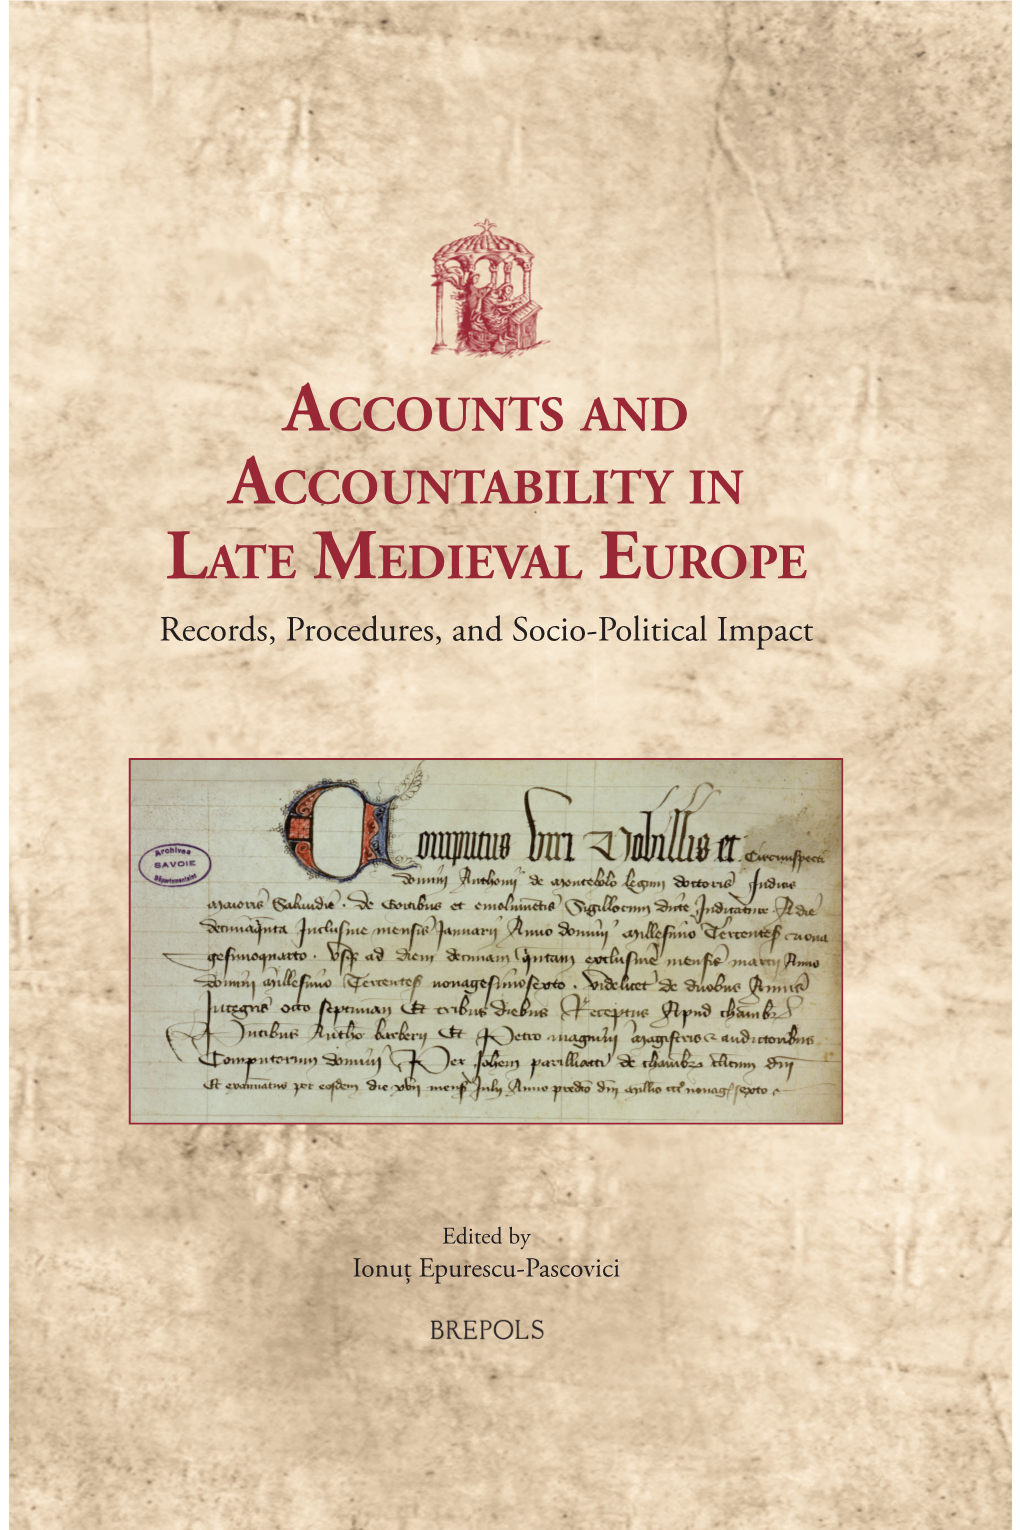 Accounts and Accountability in Late Medieval Europe